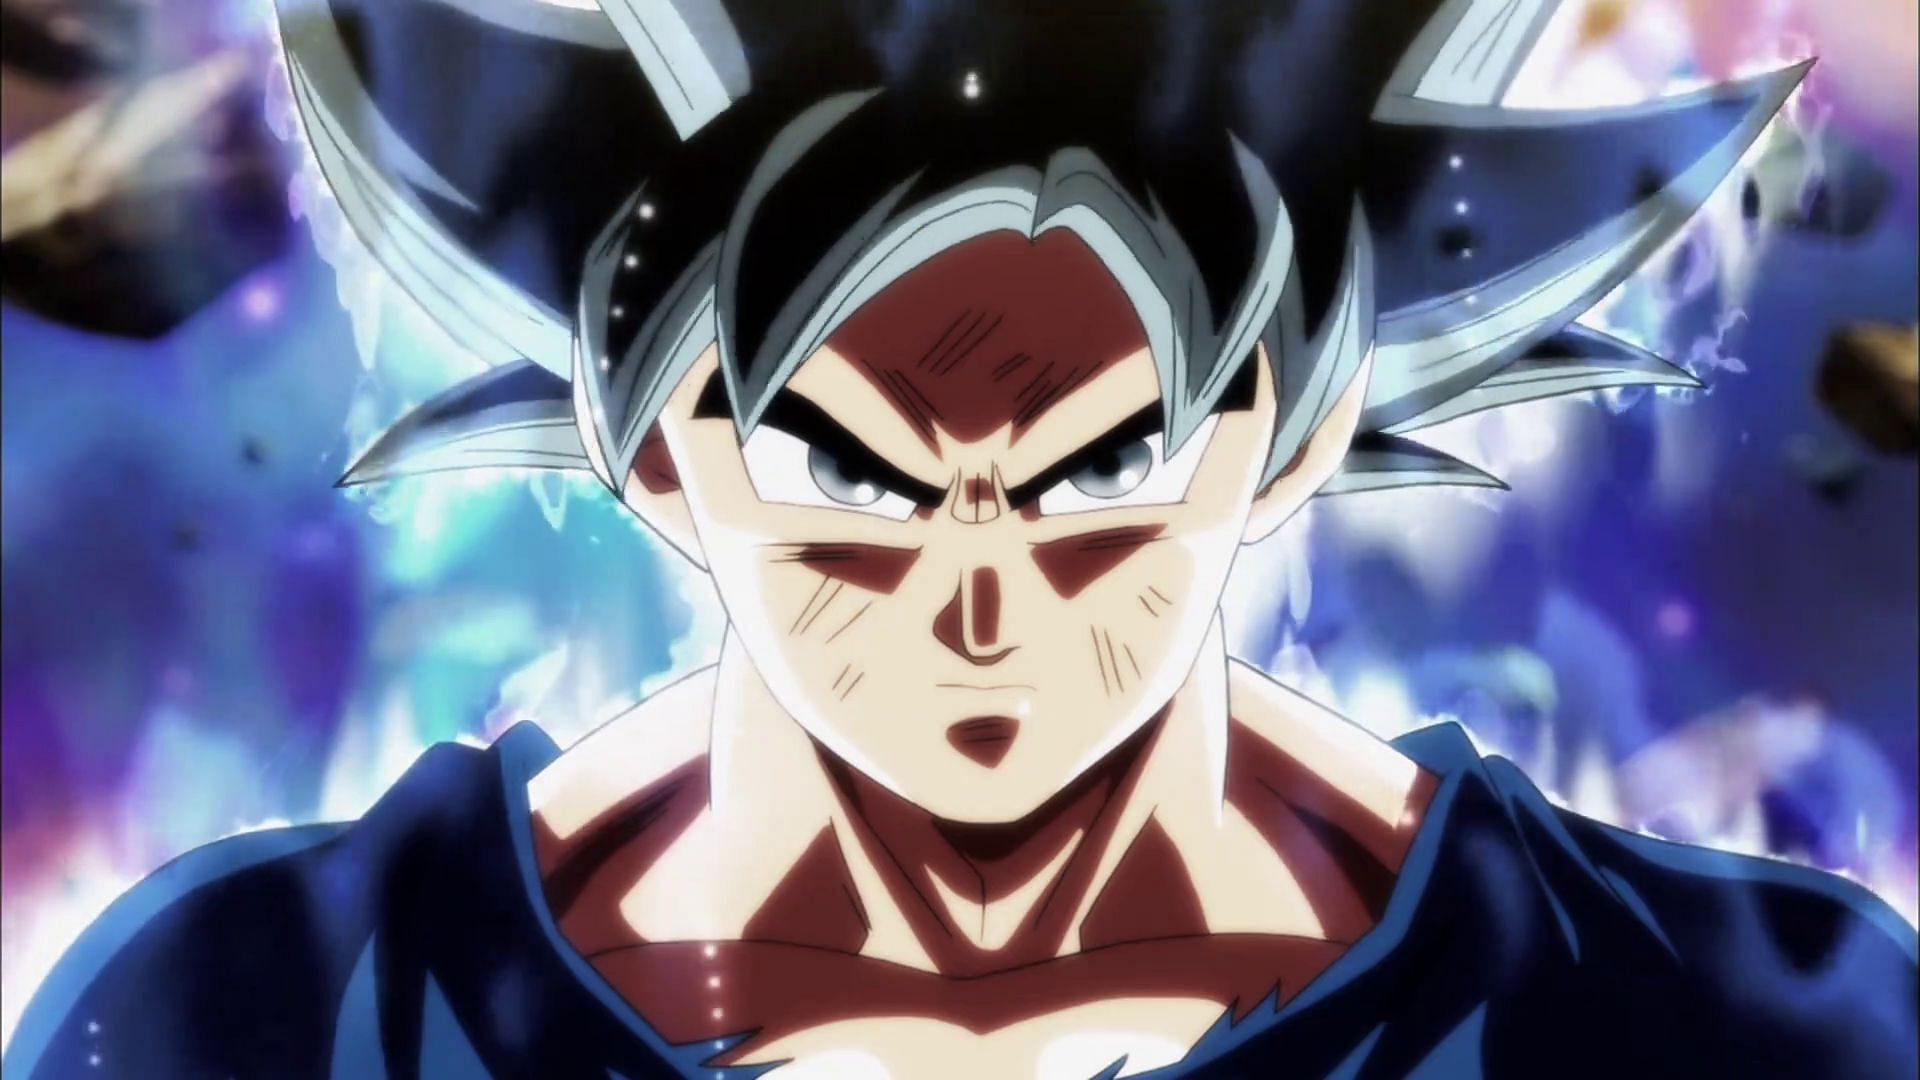 What comes after Ultra Instinct for Dragon Ball's Goku?